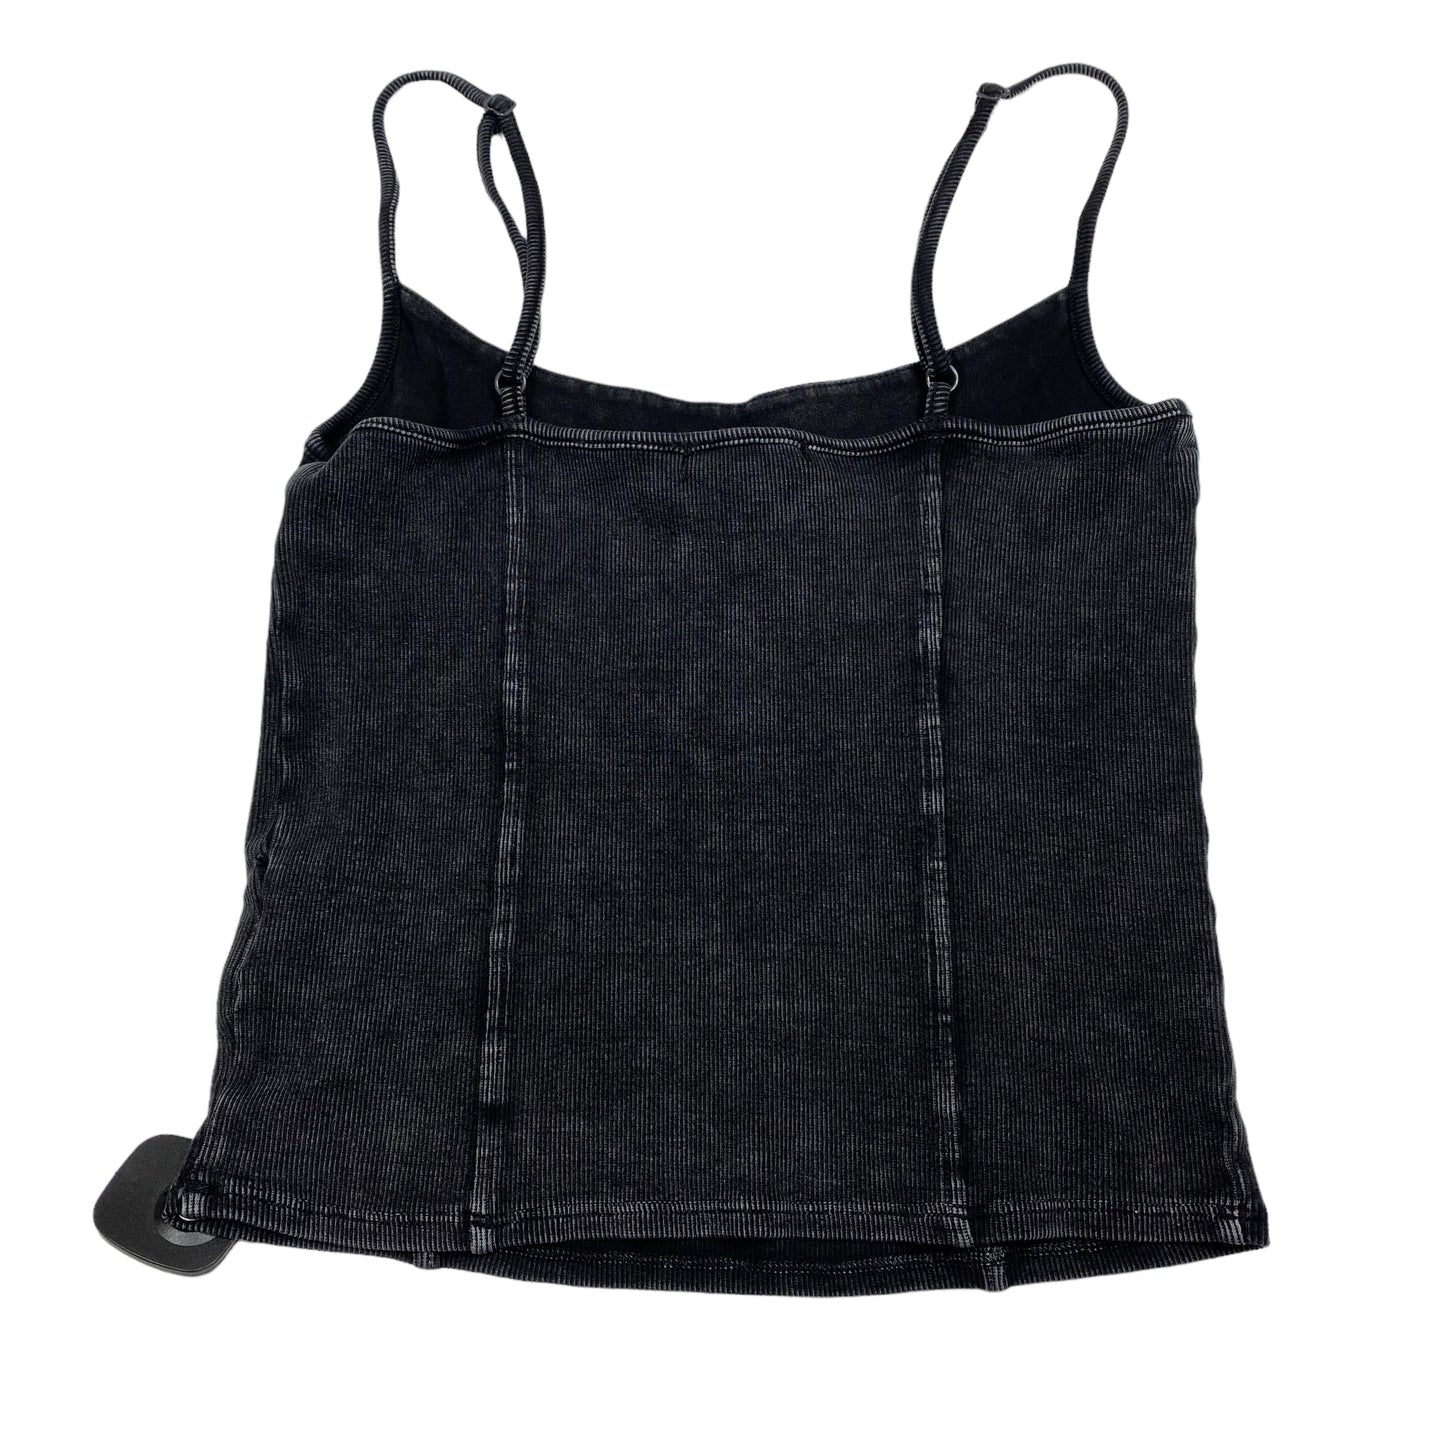 Top Sleeveless By Forever 21  Size: M